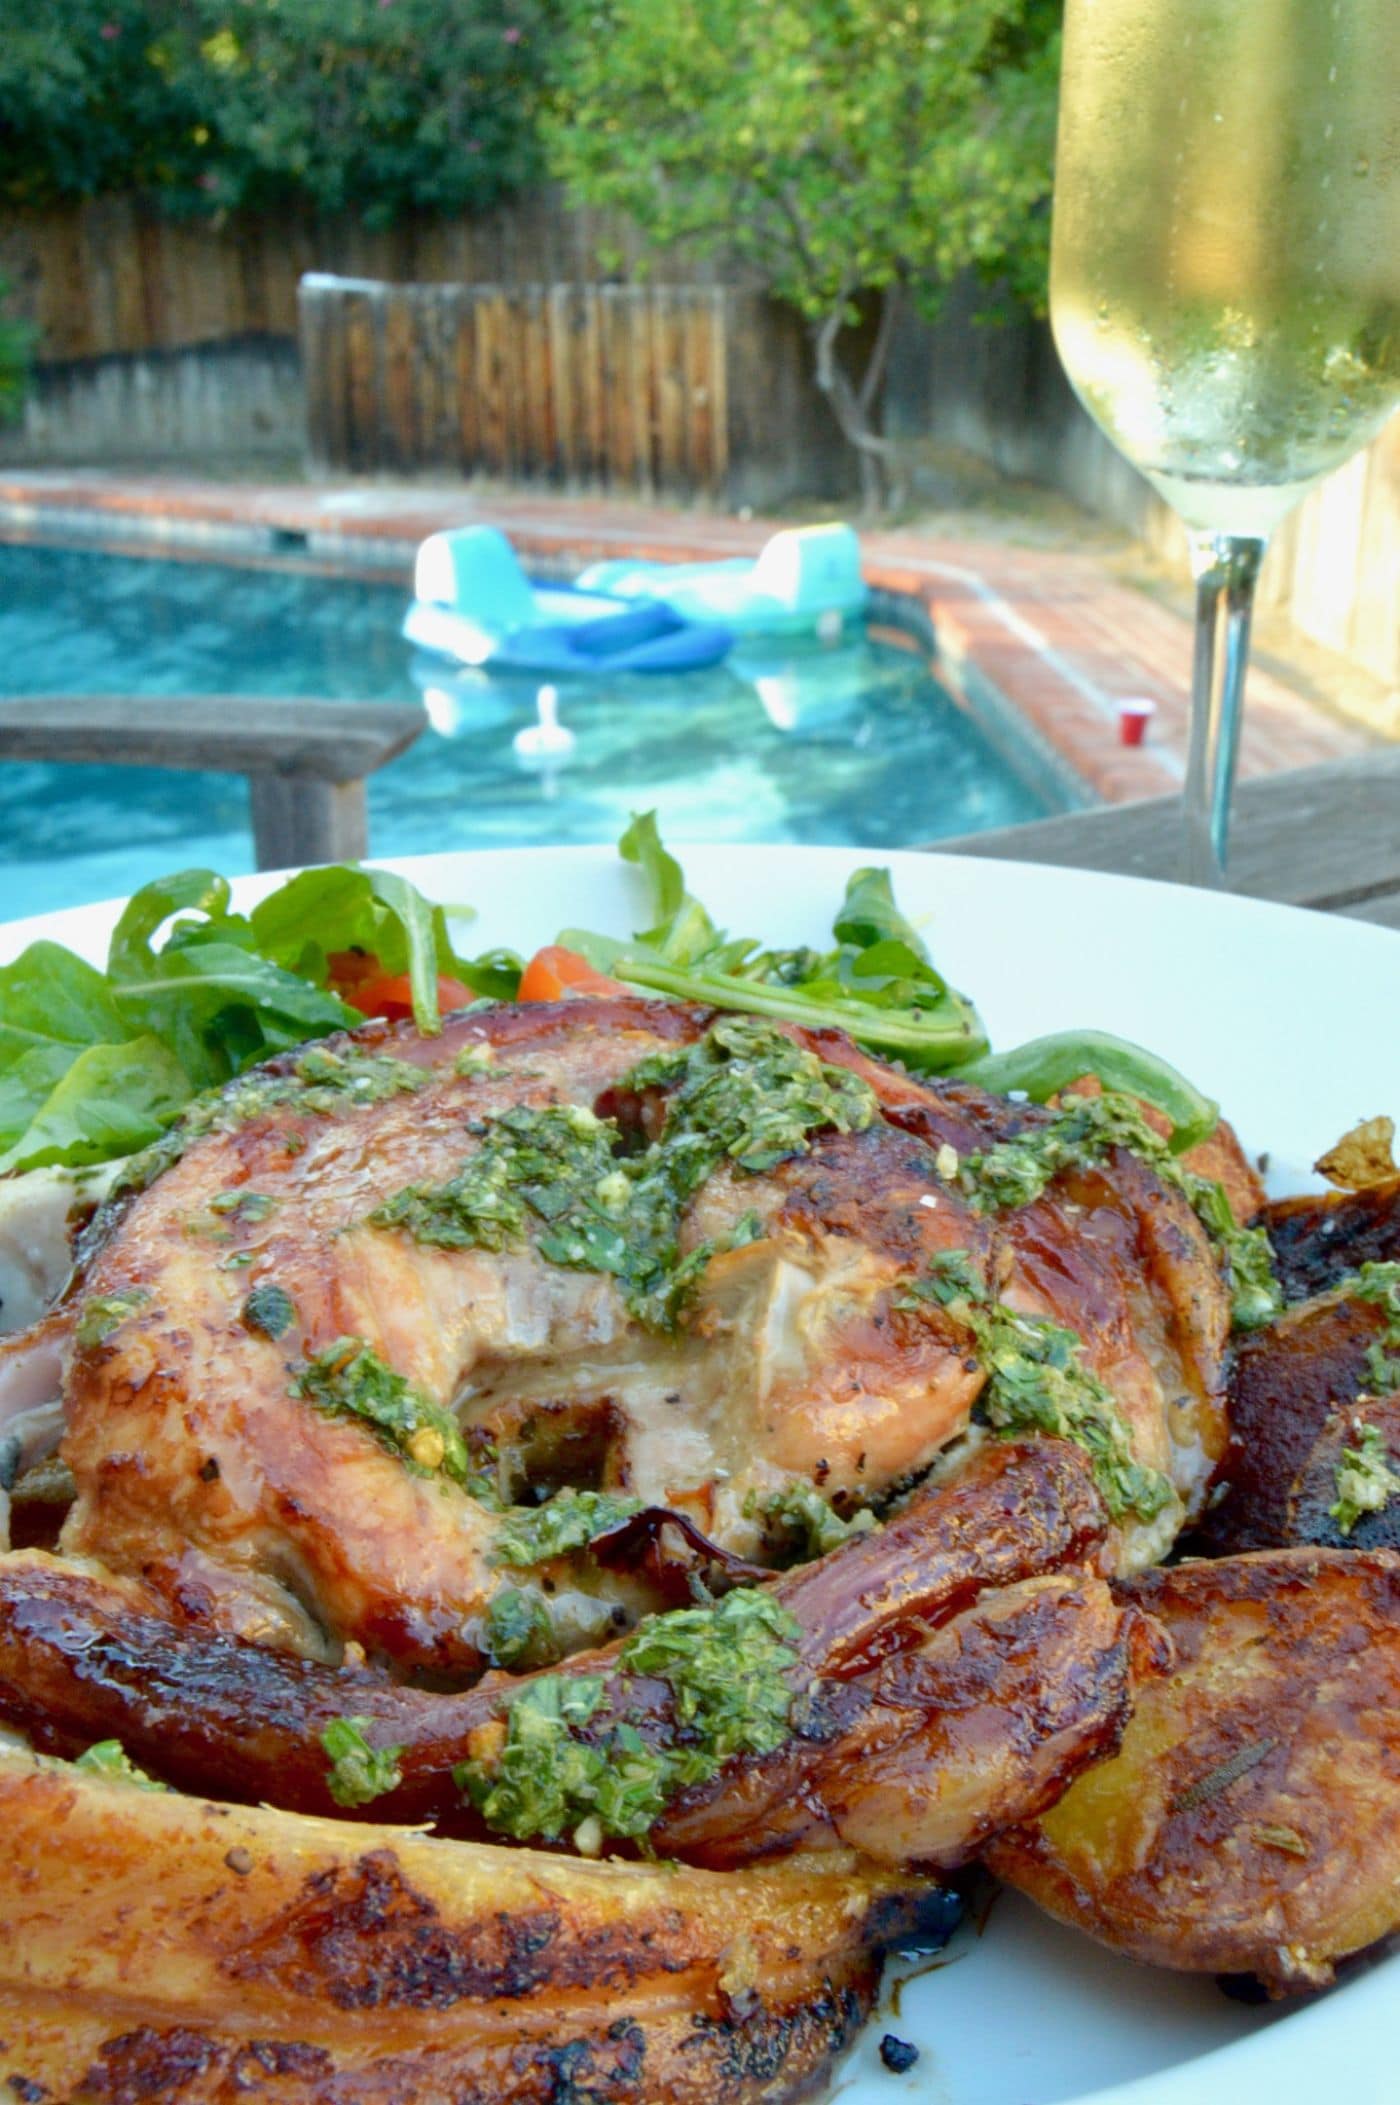 Pool side dining showcasing Porchetta, Crispy Pork Belly with herbs wrapped around a pork tenderloin and cooked to juicy, tender perfection.  A crazy impressive meal to your guests, but you'll know how simple it was to make!Porchetta, Crispy Pork Belly with herbs wrapped around a pork tenderloin and cooked to juicy, tender perfection.  A crazy impressive meal to your guests, but you'll know how simple it was to make!